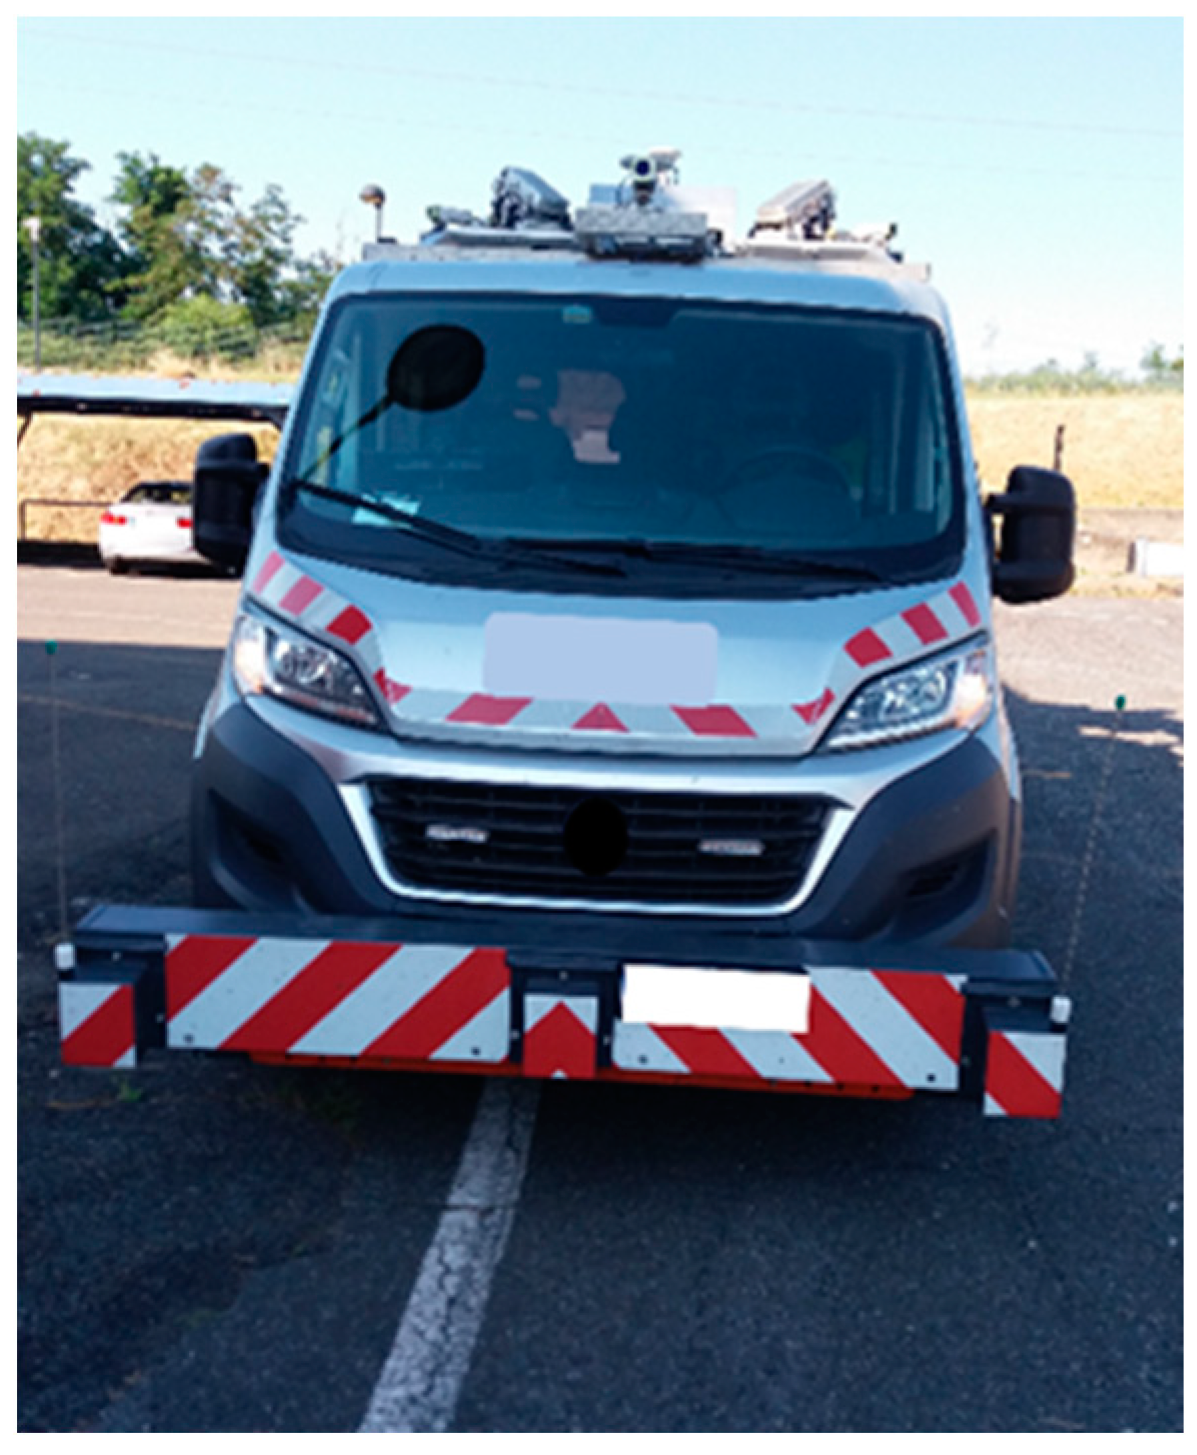 Reinforced Trafic to combat break-ins launched by Renault Trucks